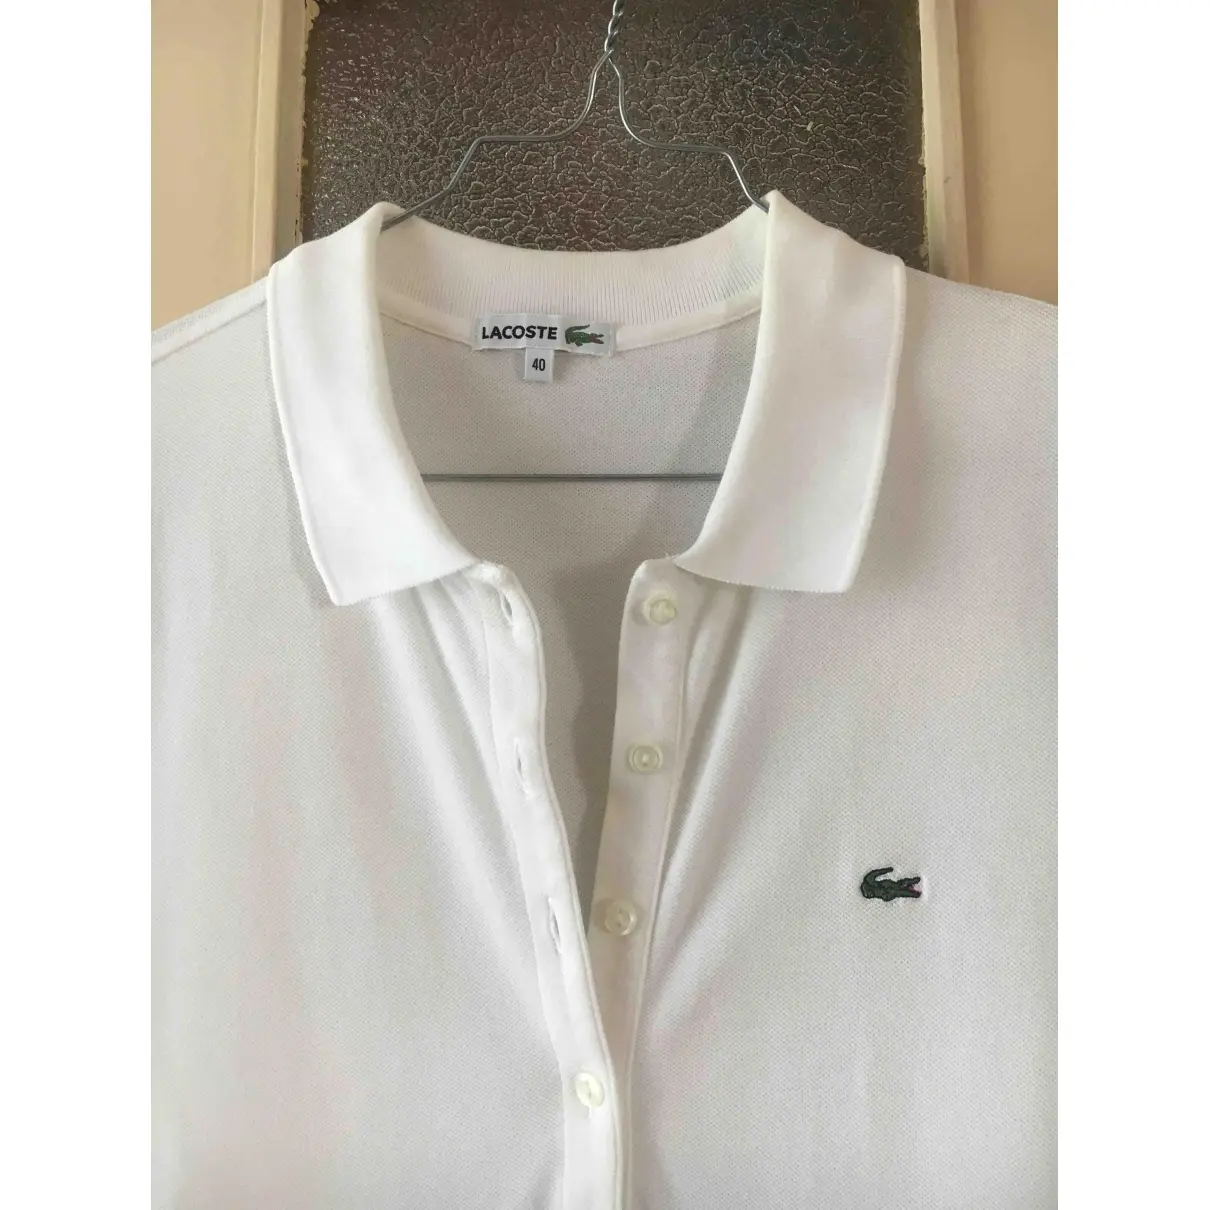 Lacoste Mid-length dress for sale